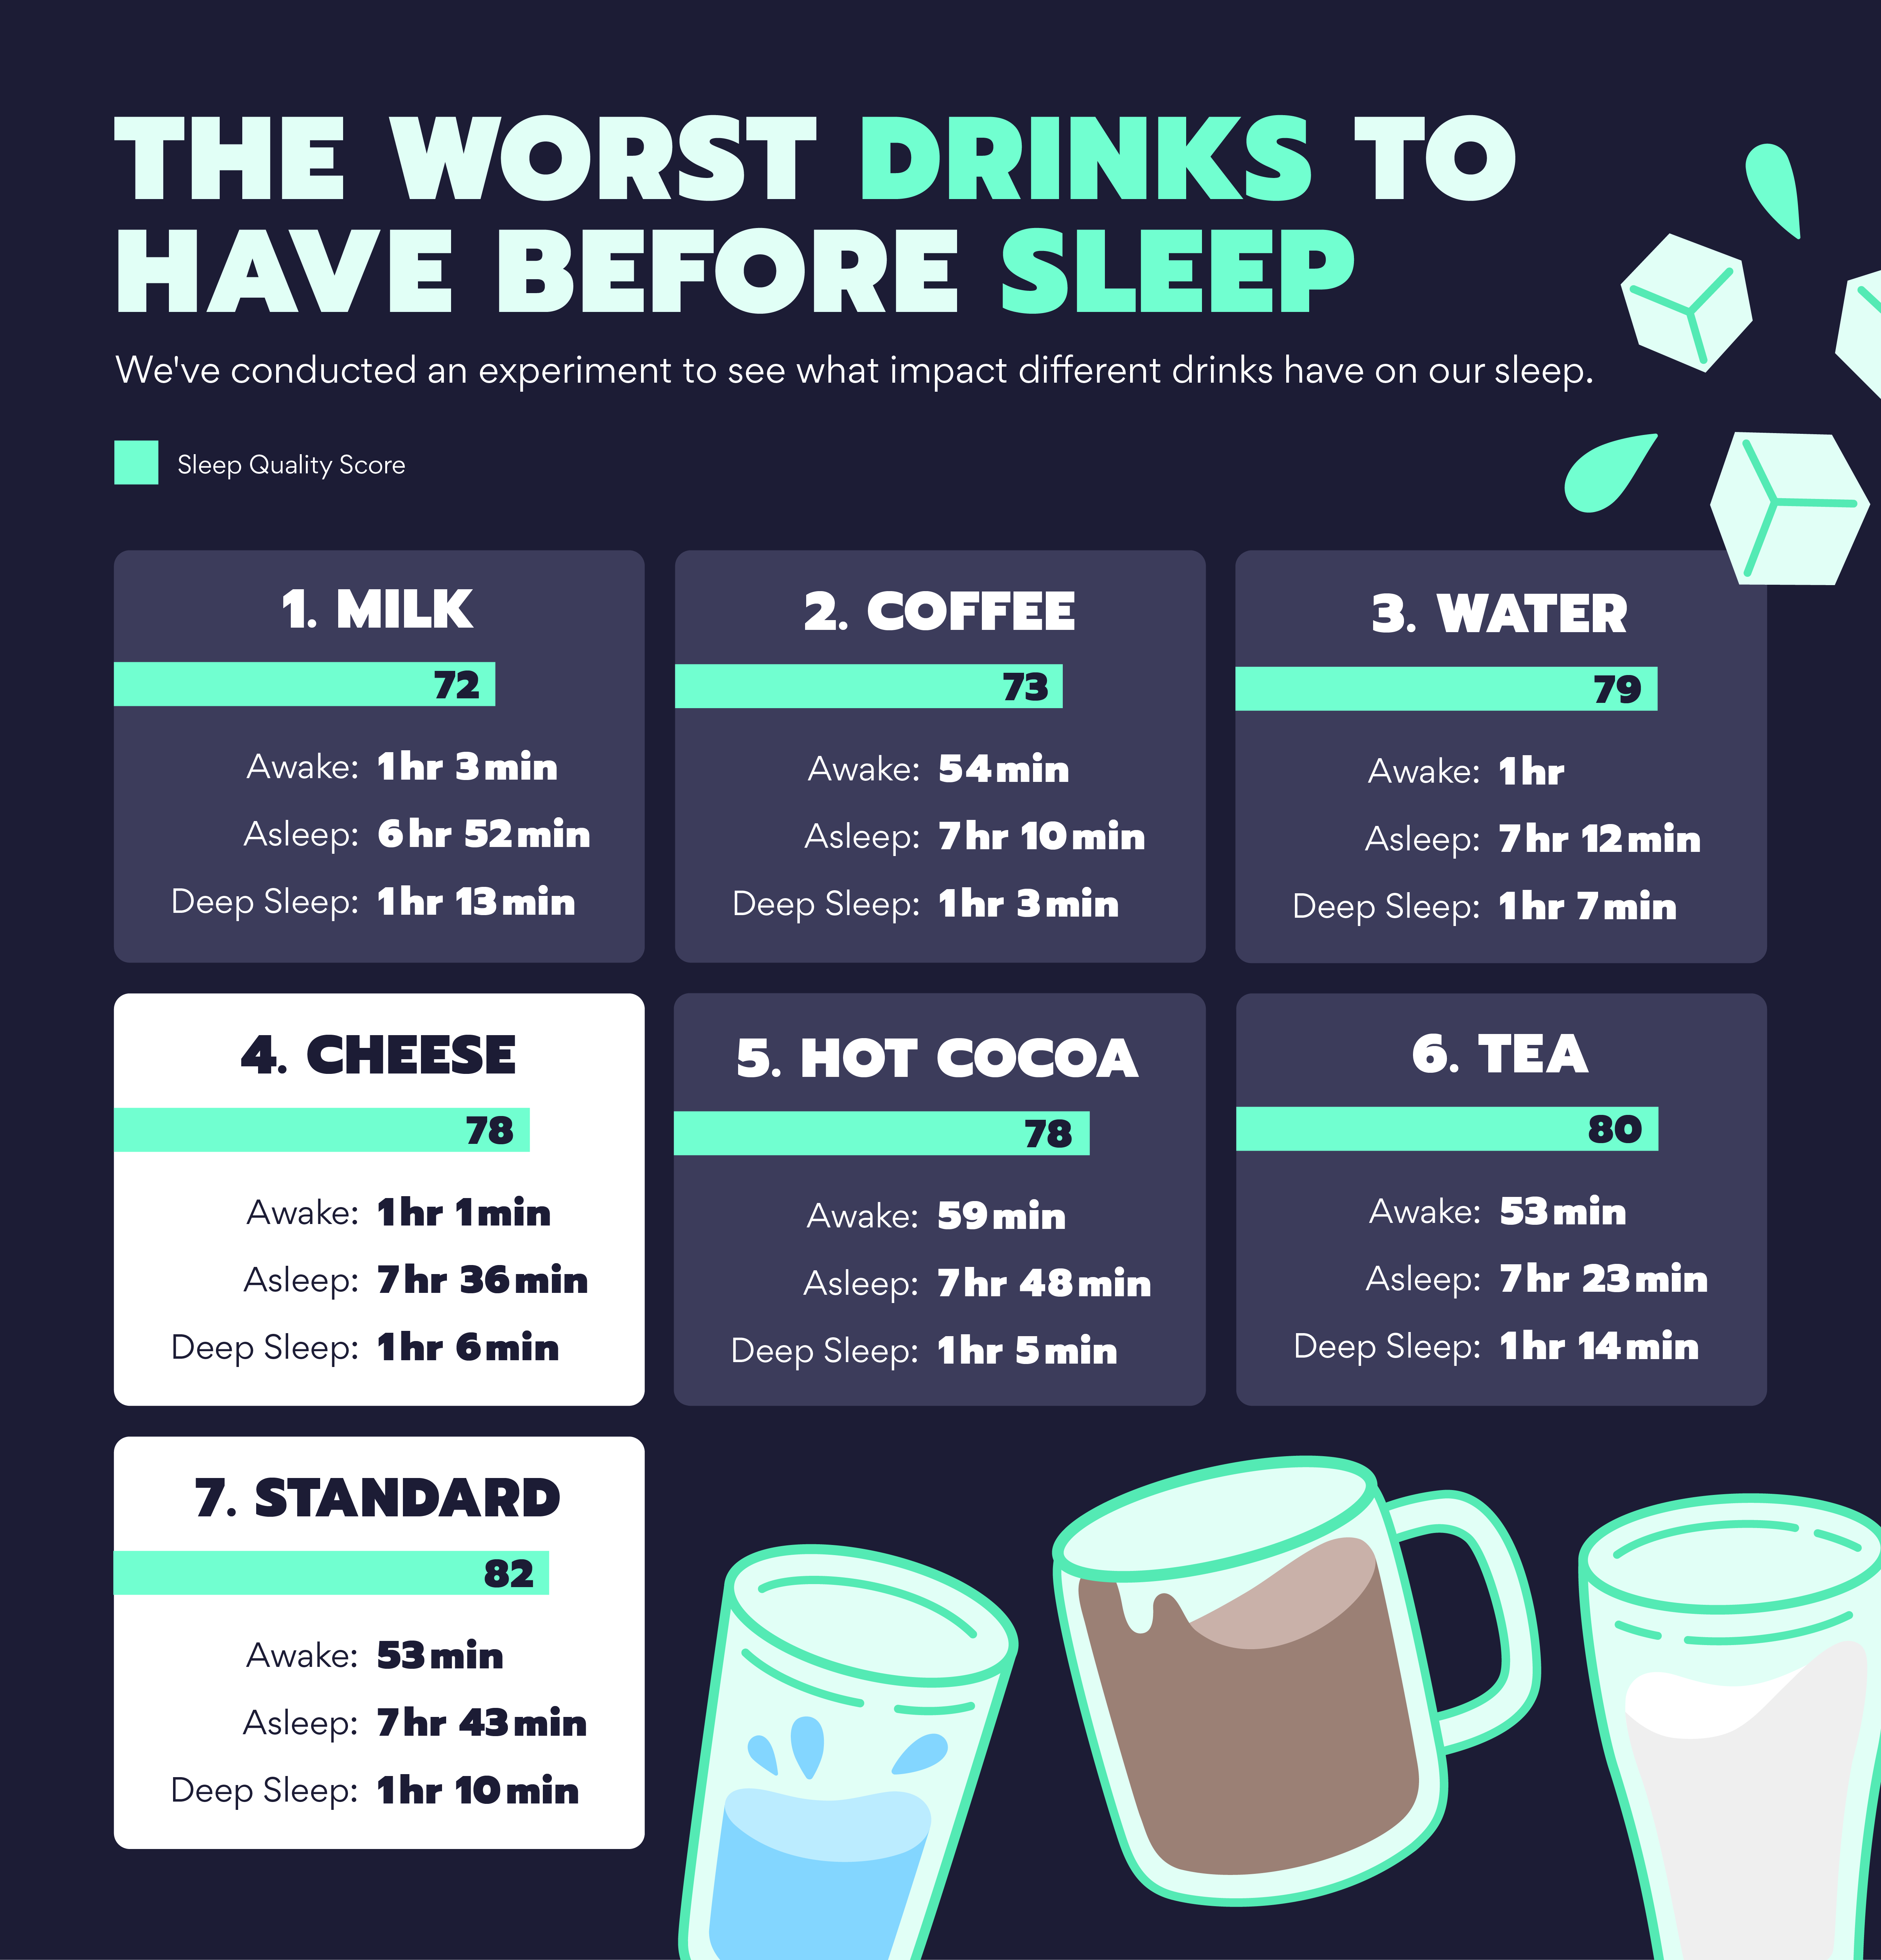 Which drinks impact our sleep the most?